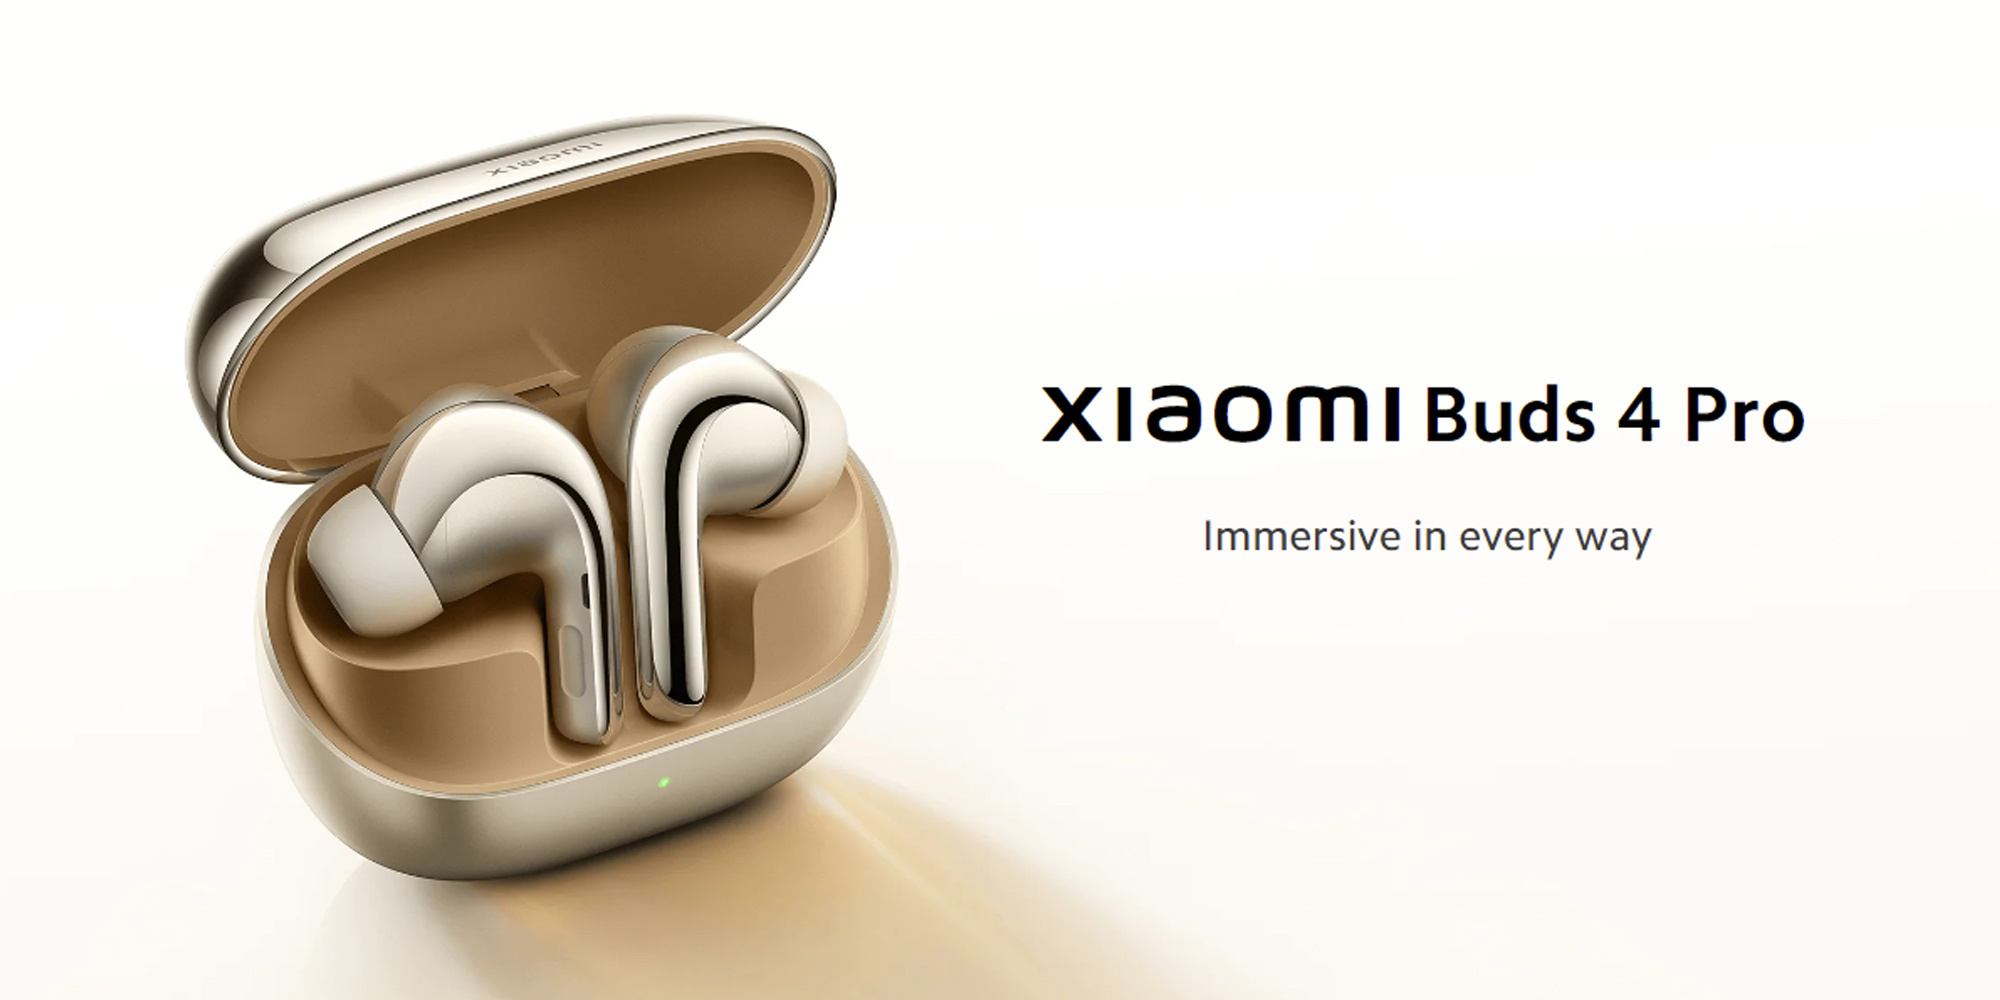 Xiaomi Buds 4 Pro with powerful noise cancellation, 38 hours of battery  life launched - Gizmochina